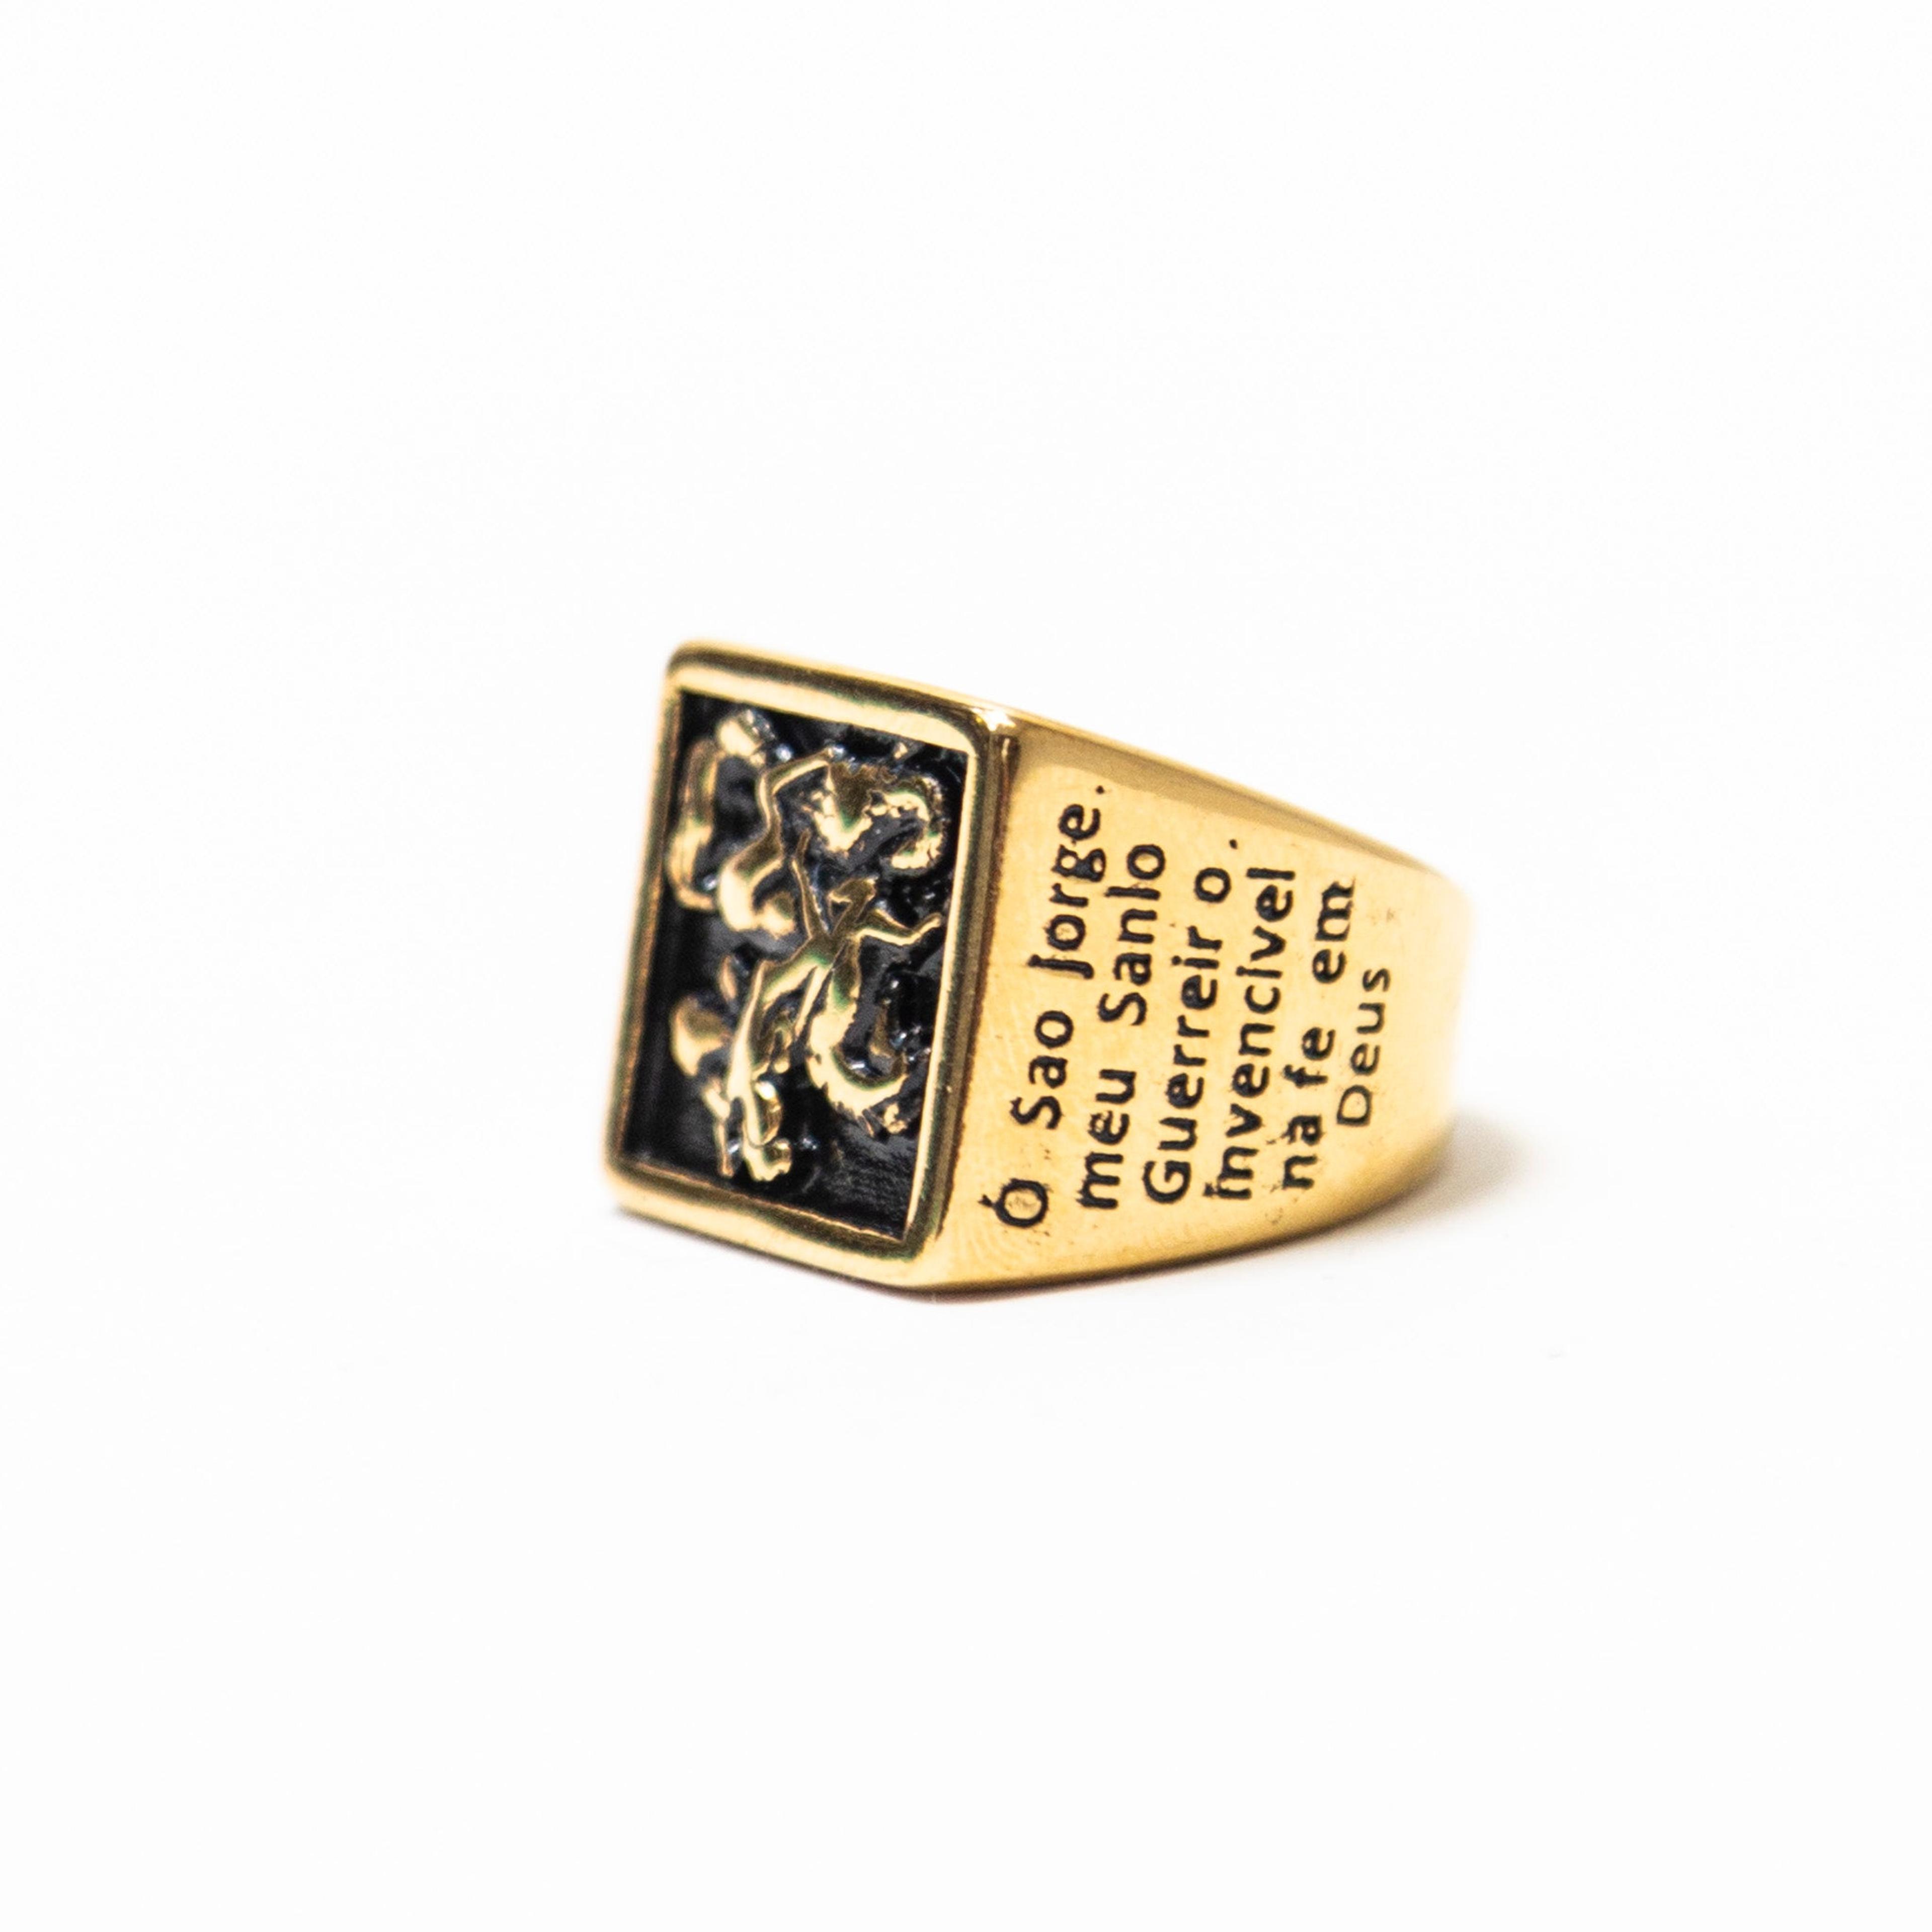 Alternate View 1 of ST George Signet Ring